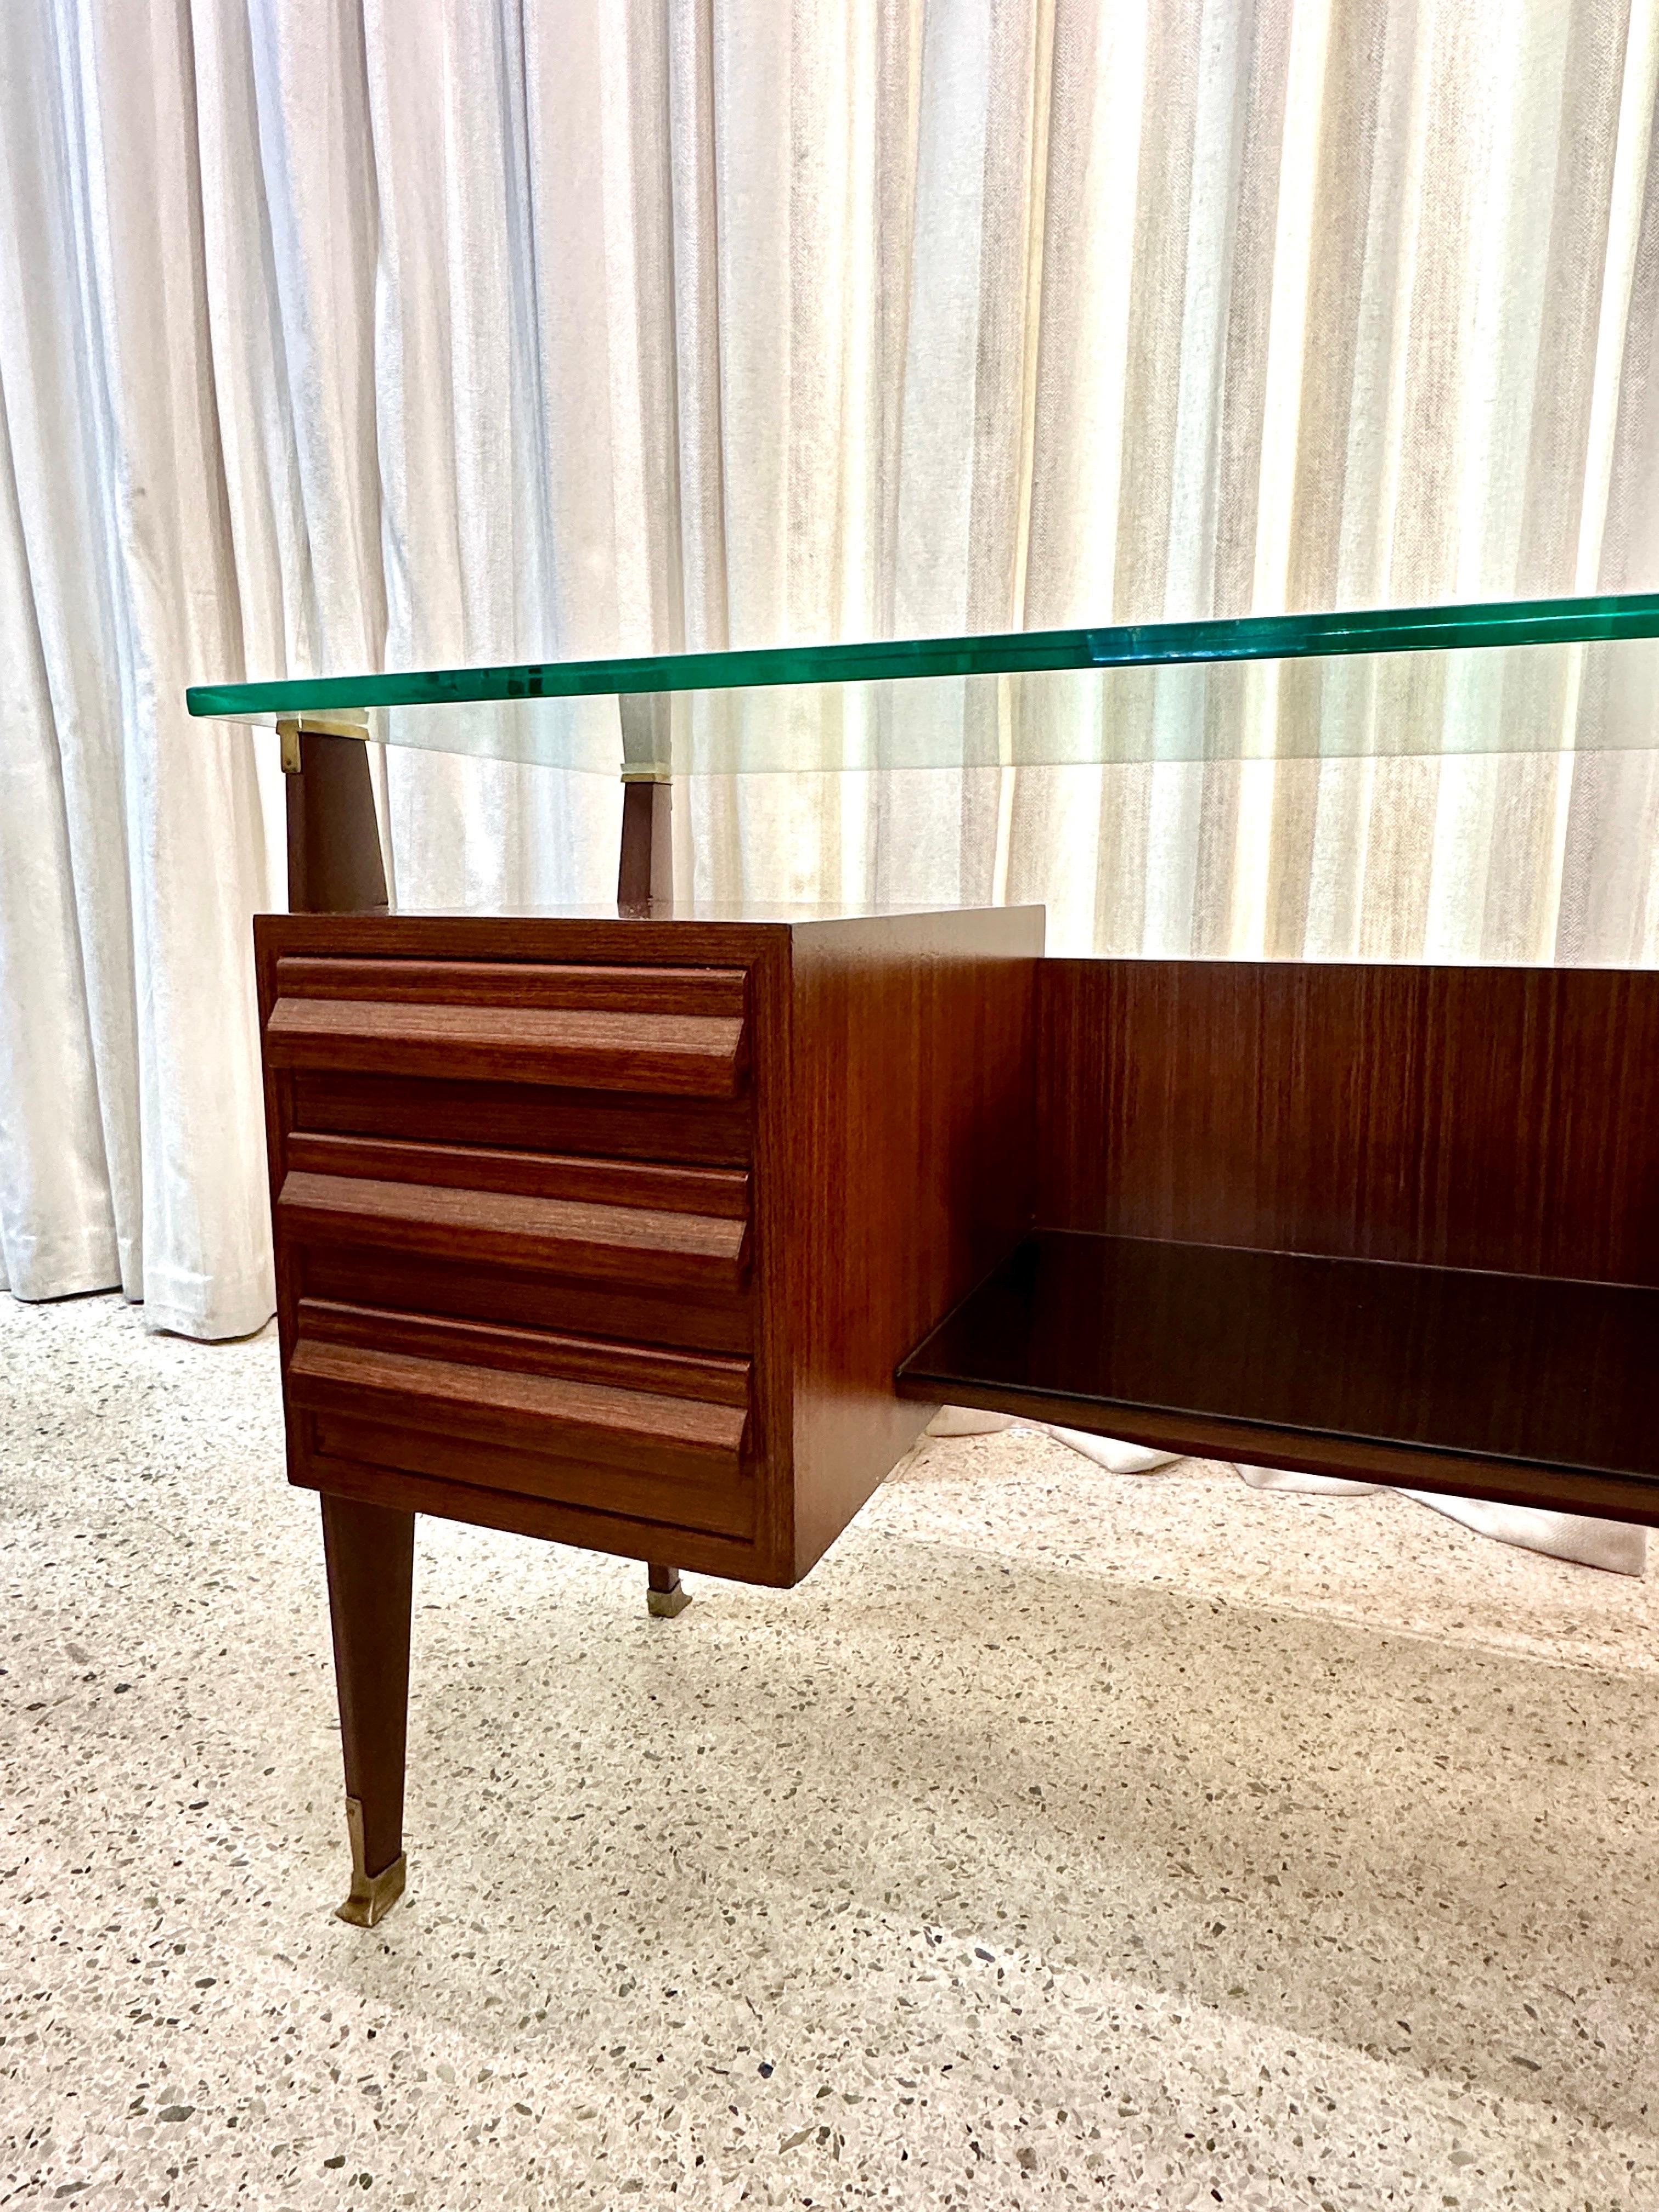 Mid-Century Walnut, Glass and Brass Italian Sideboard 1960's For Sale 4